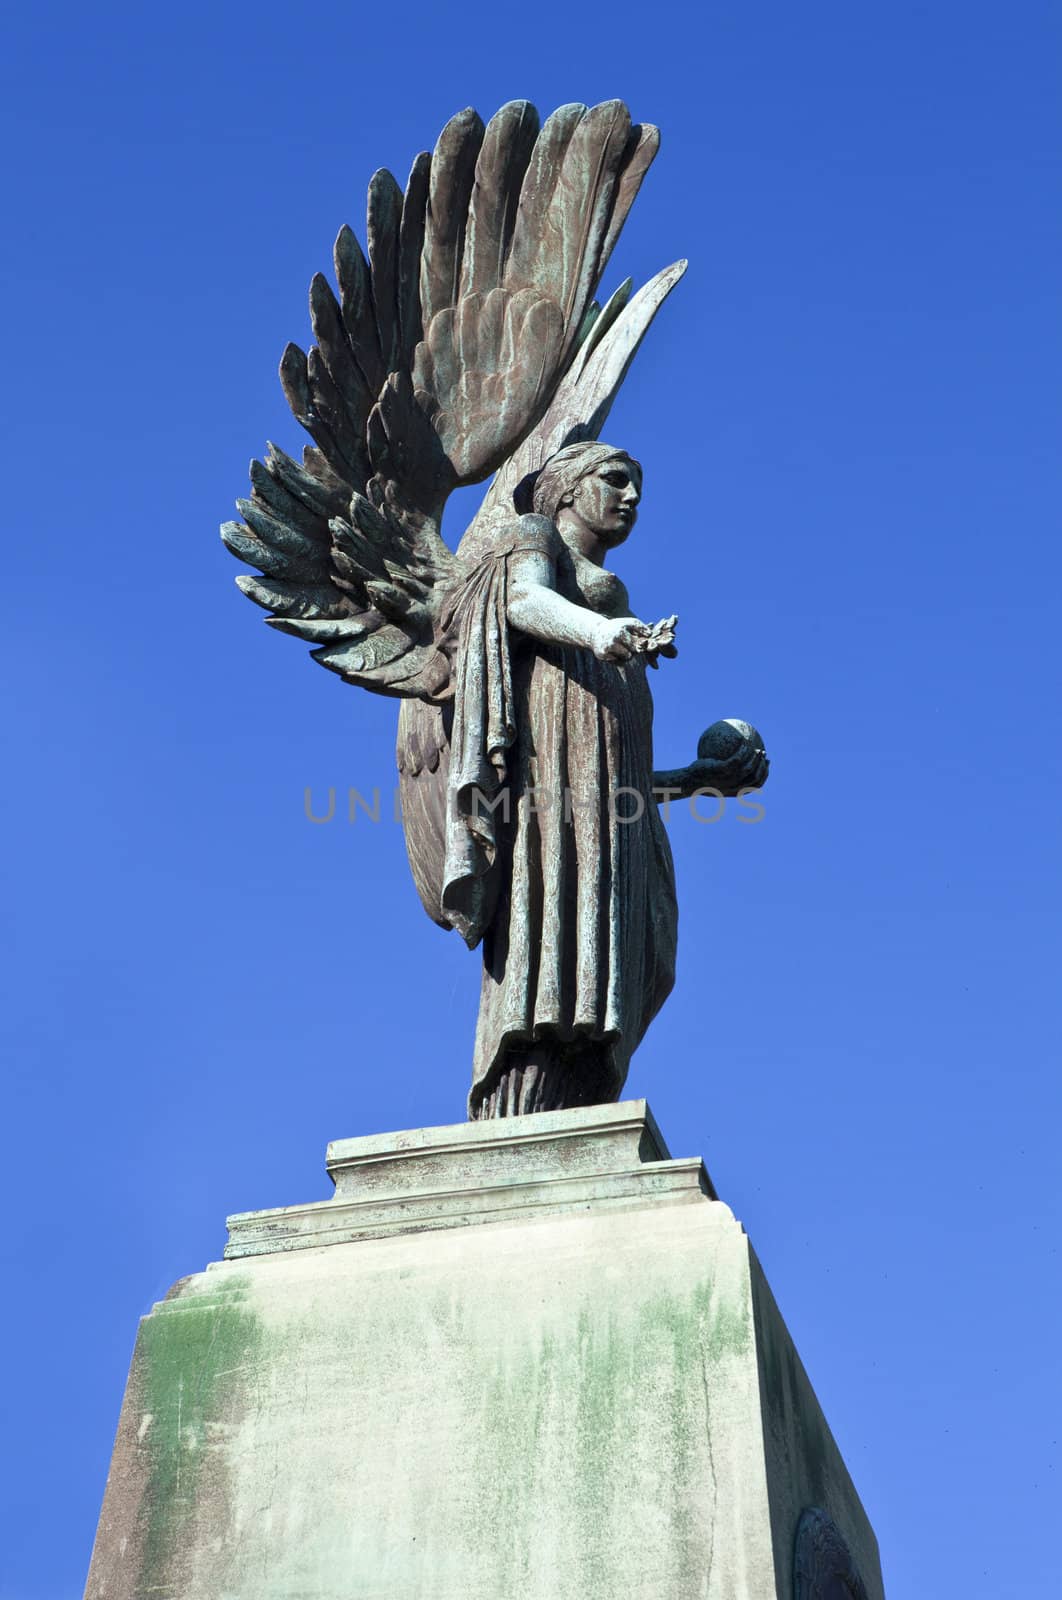 The Angel From Edward VII's Memorial in Parade Gardens in Bath, Somerset.